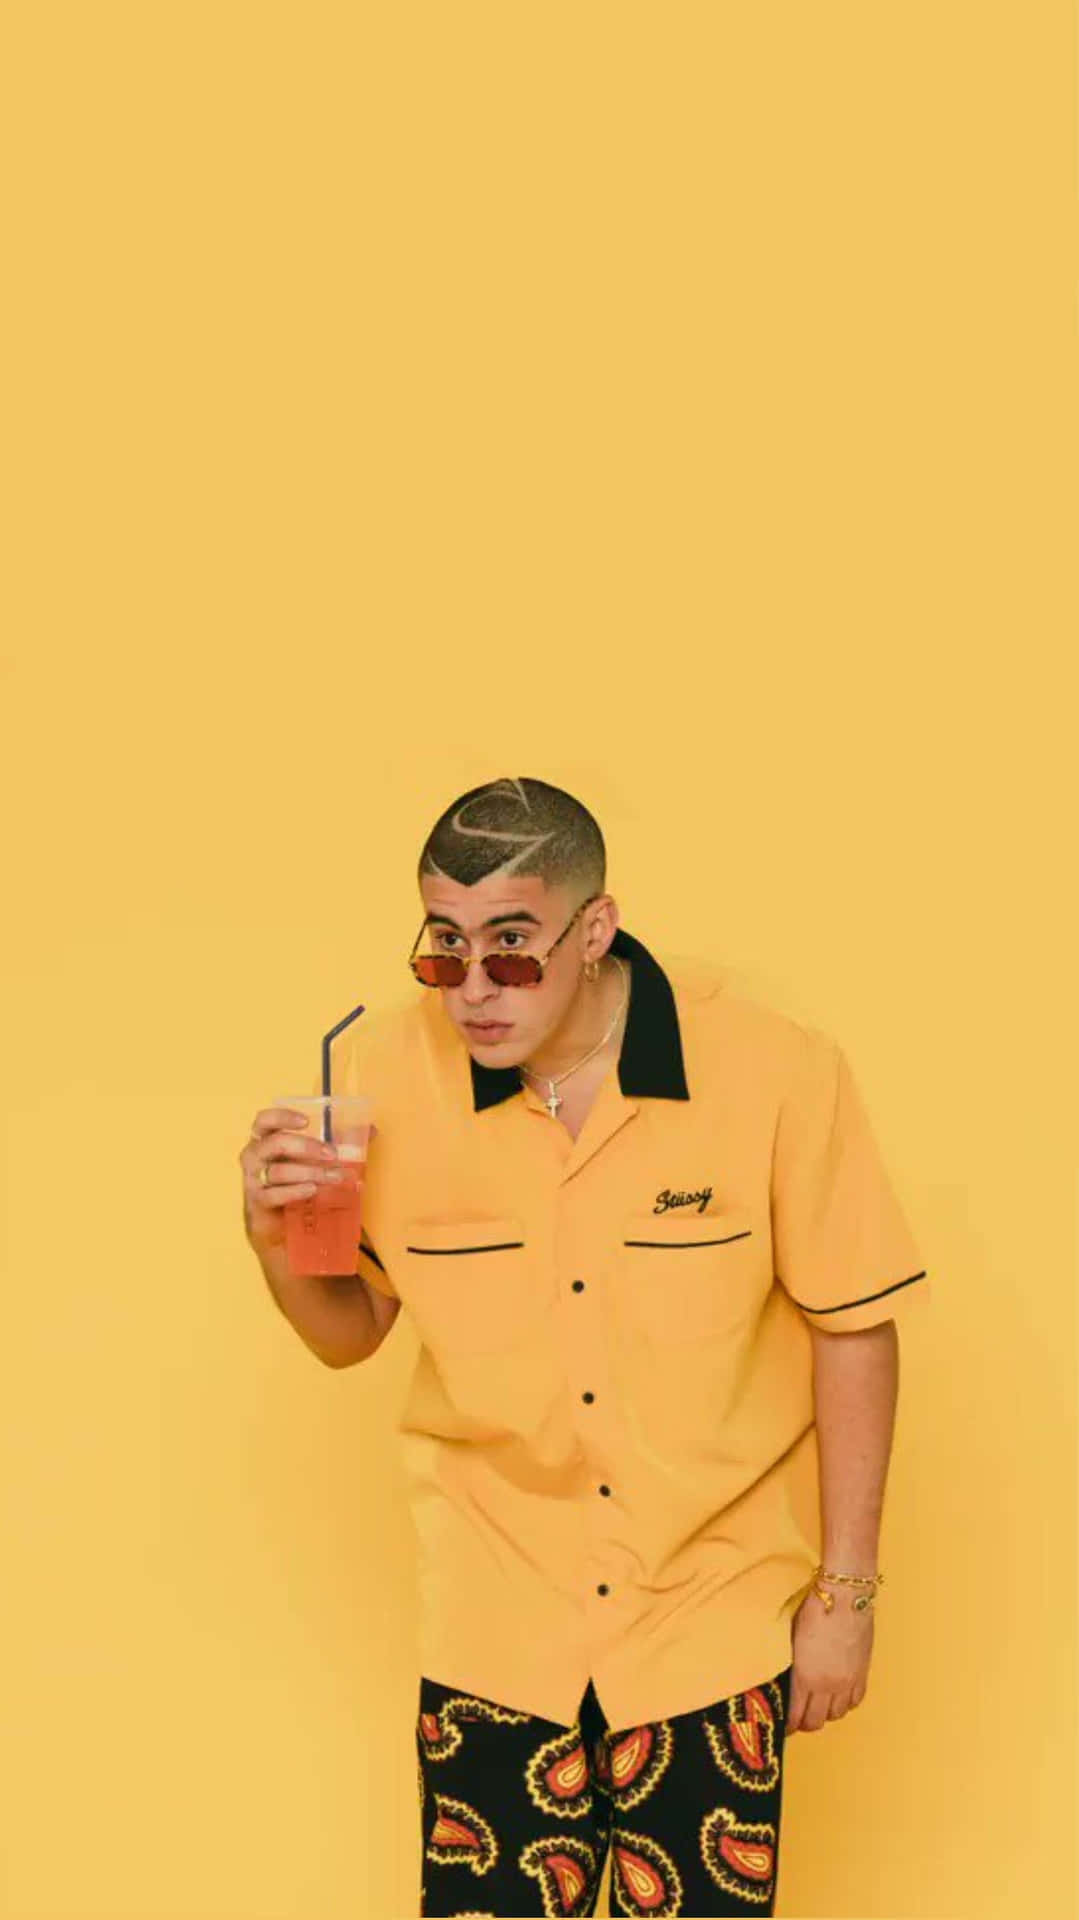 A Man In A Yellow Shirt Holding A Drink